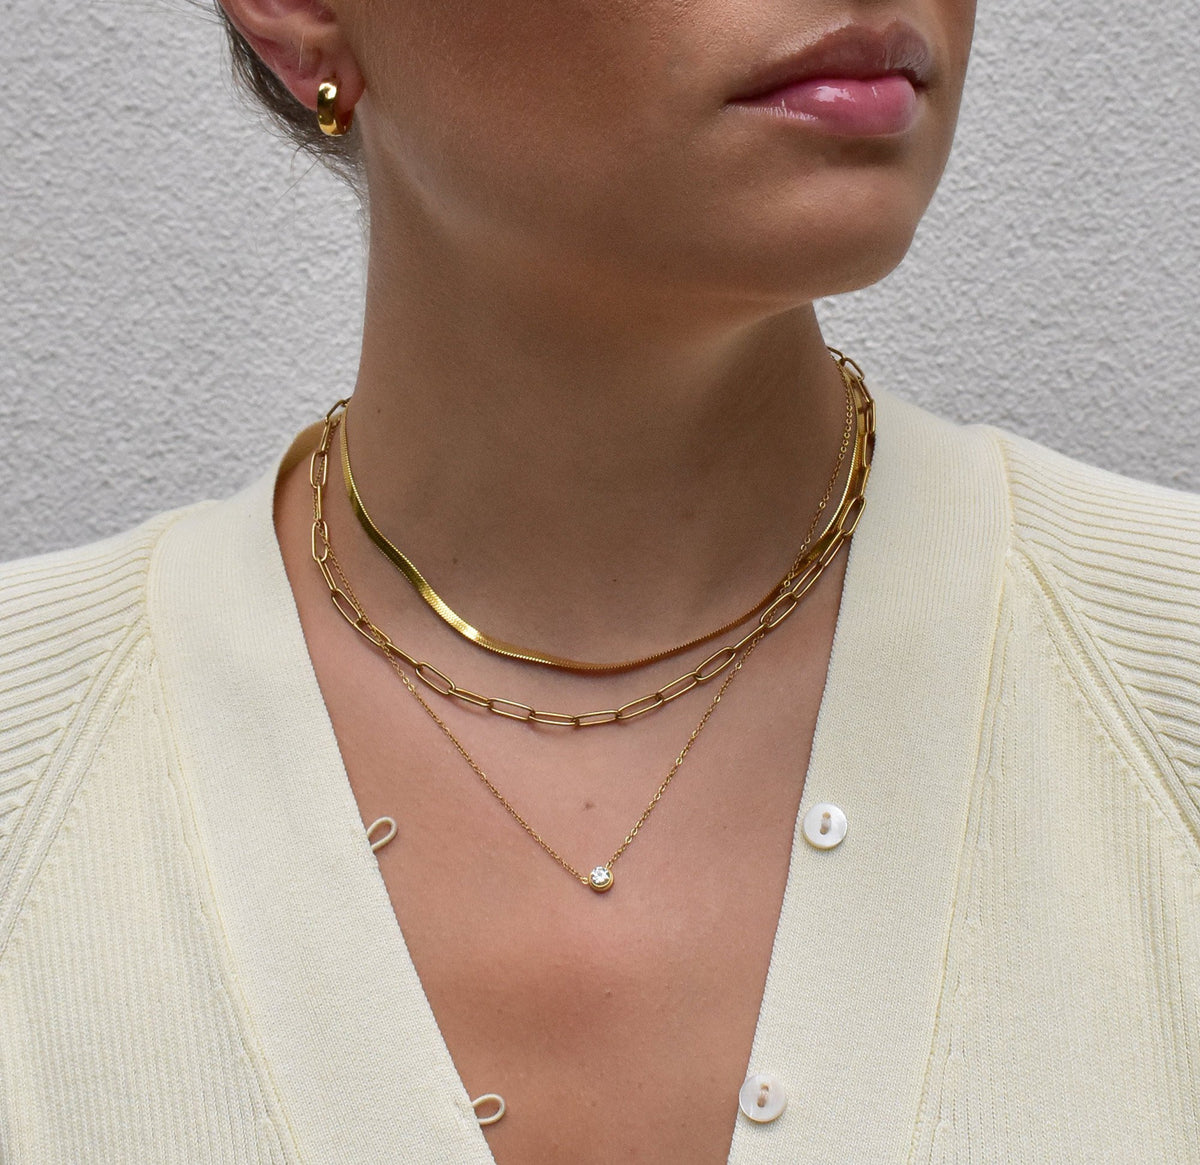 dainty gold chain necklace stack waterproof jewelry